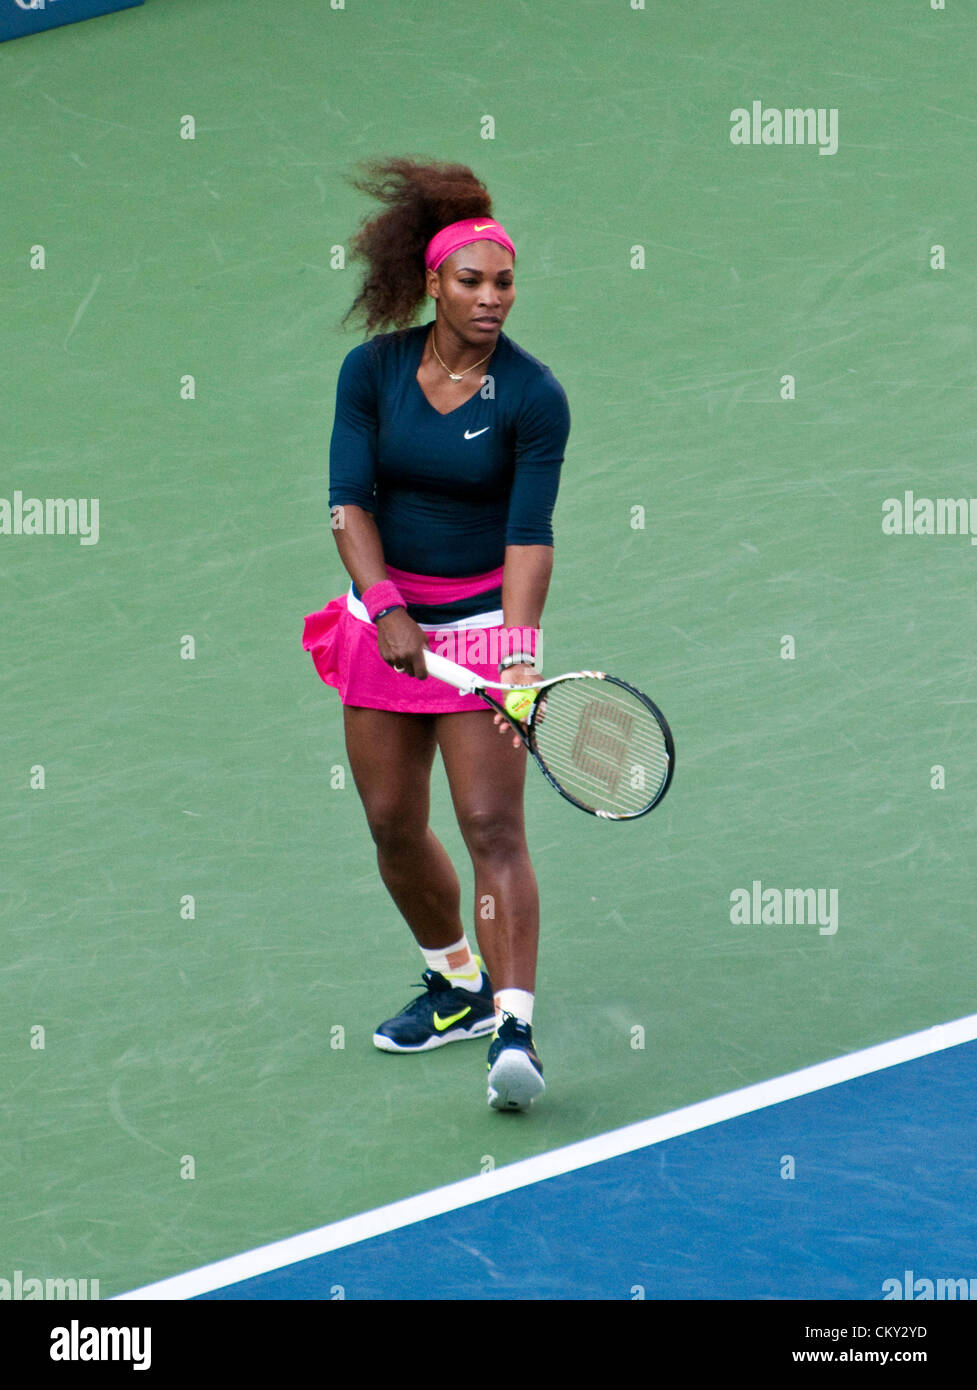 Serena Williams of the USA serving during the women's doubles second round match on Day Five of the 2012 US Open on August 31, 2012. She and her sister, Venus WIlliams, are playing against Kristina Mladenovic of France, and Klaudia Jans-Ignacik of Poland at the Billie Jean King National Tennis Center in Flushing, New York. Stock Photo